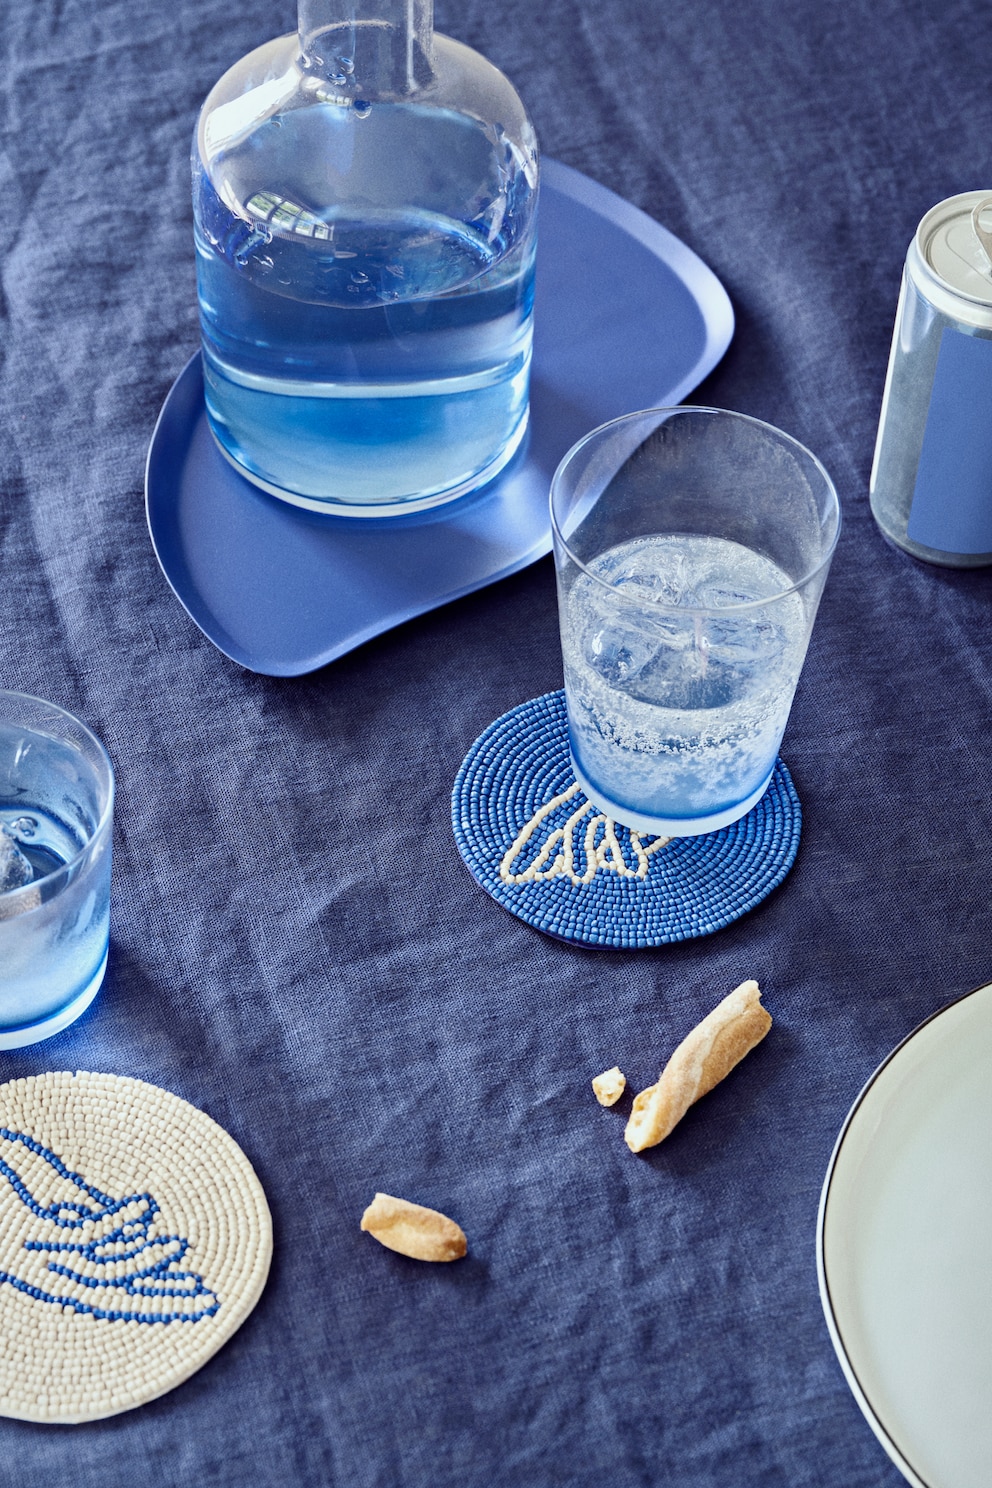 All items – except a few – should be of the same colour to create eye-catching table decoration.